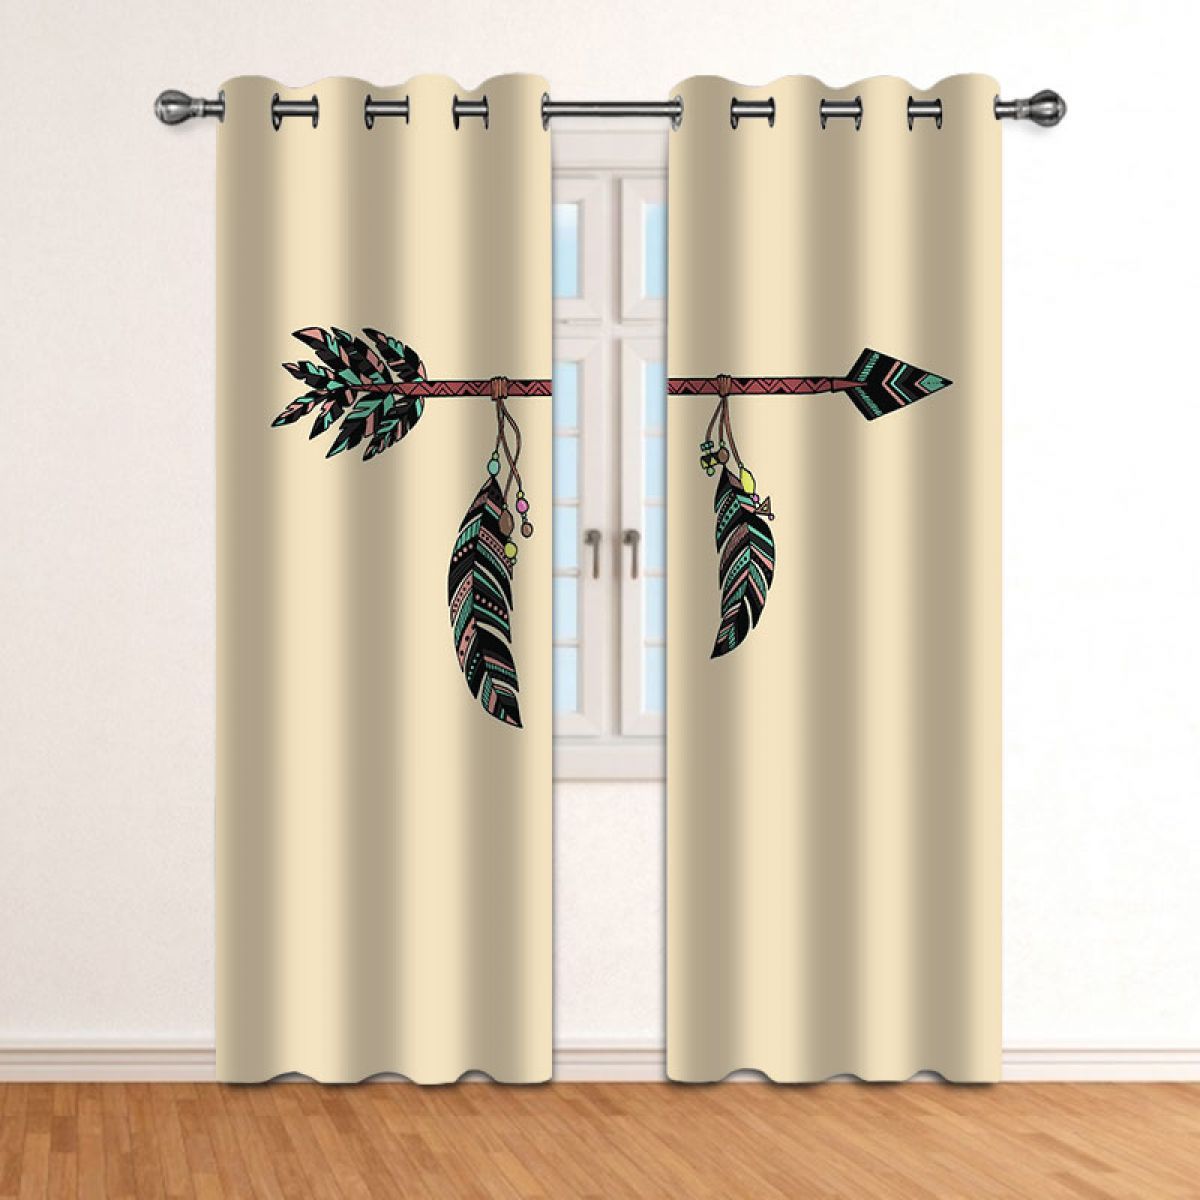 Black Feather Printed Window Curtain Home Decor